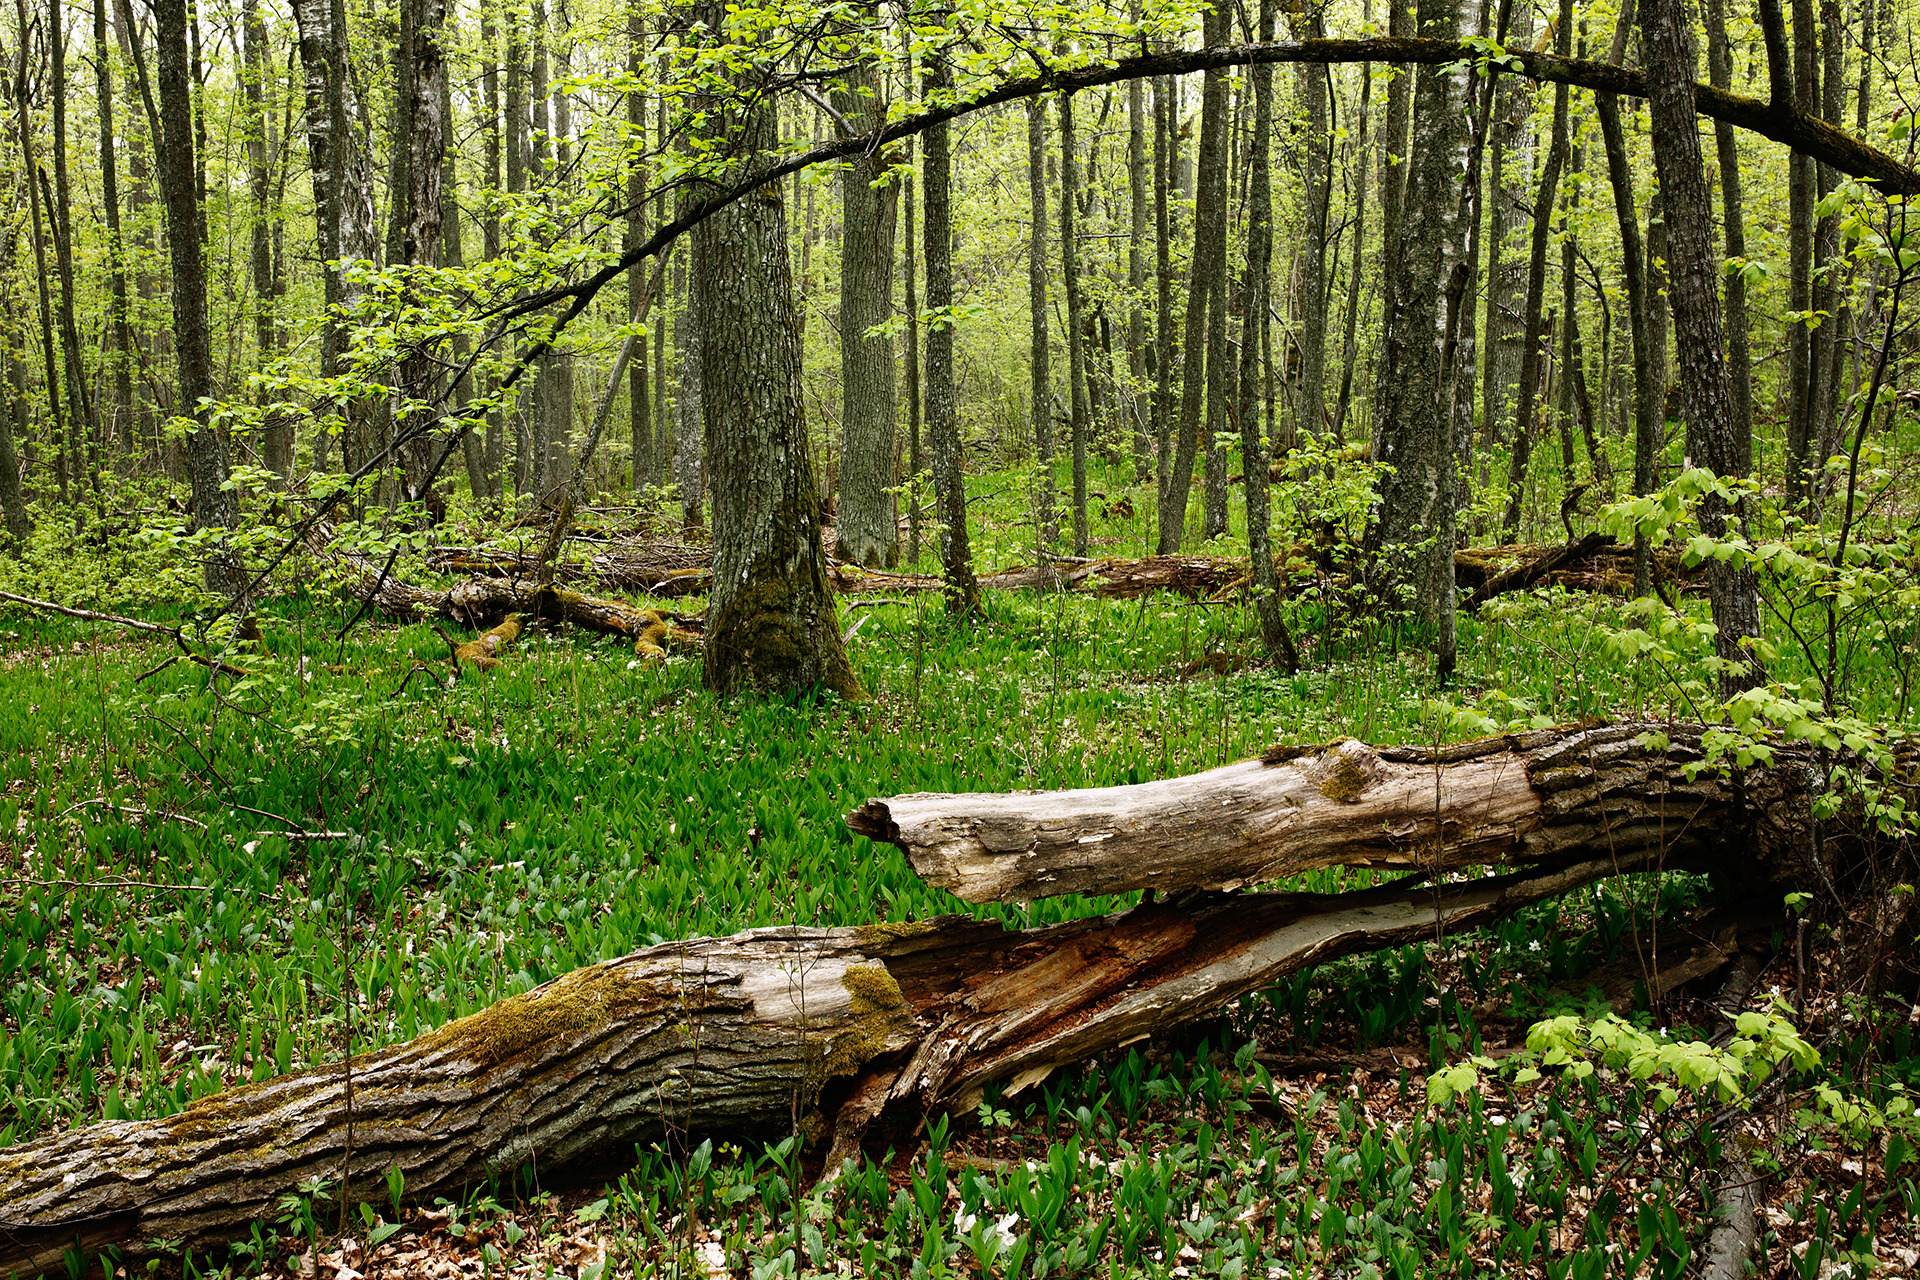 A herb-rich forest in spring / Photo: A. Kuusela